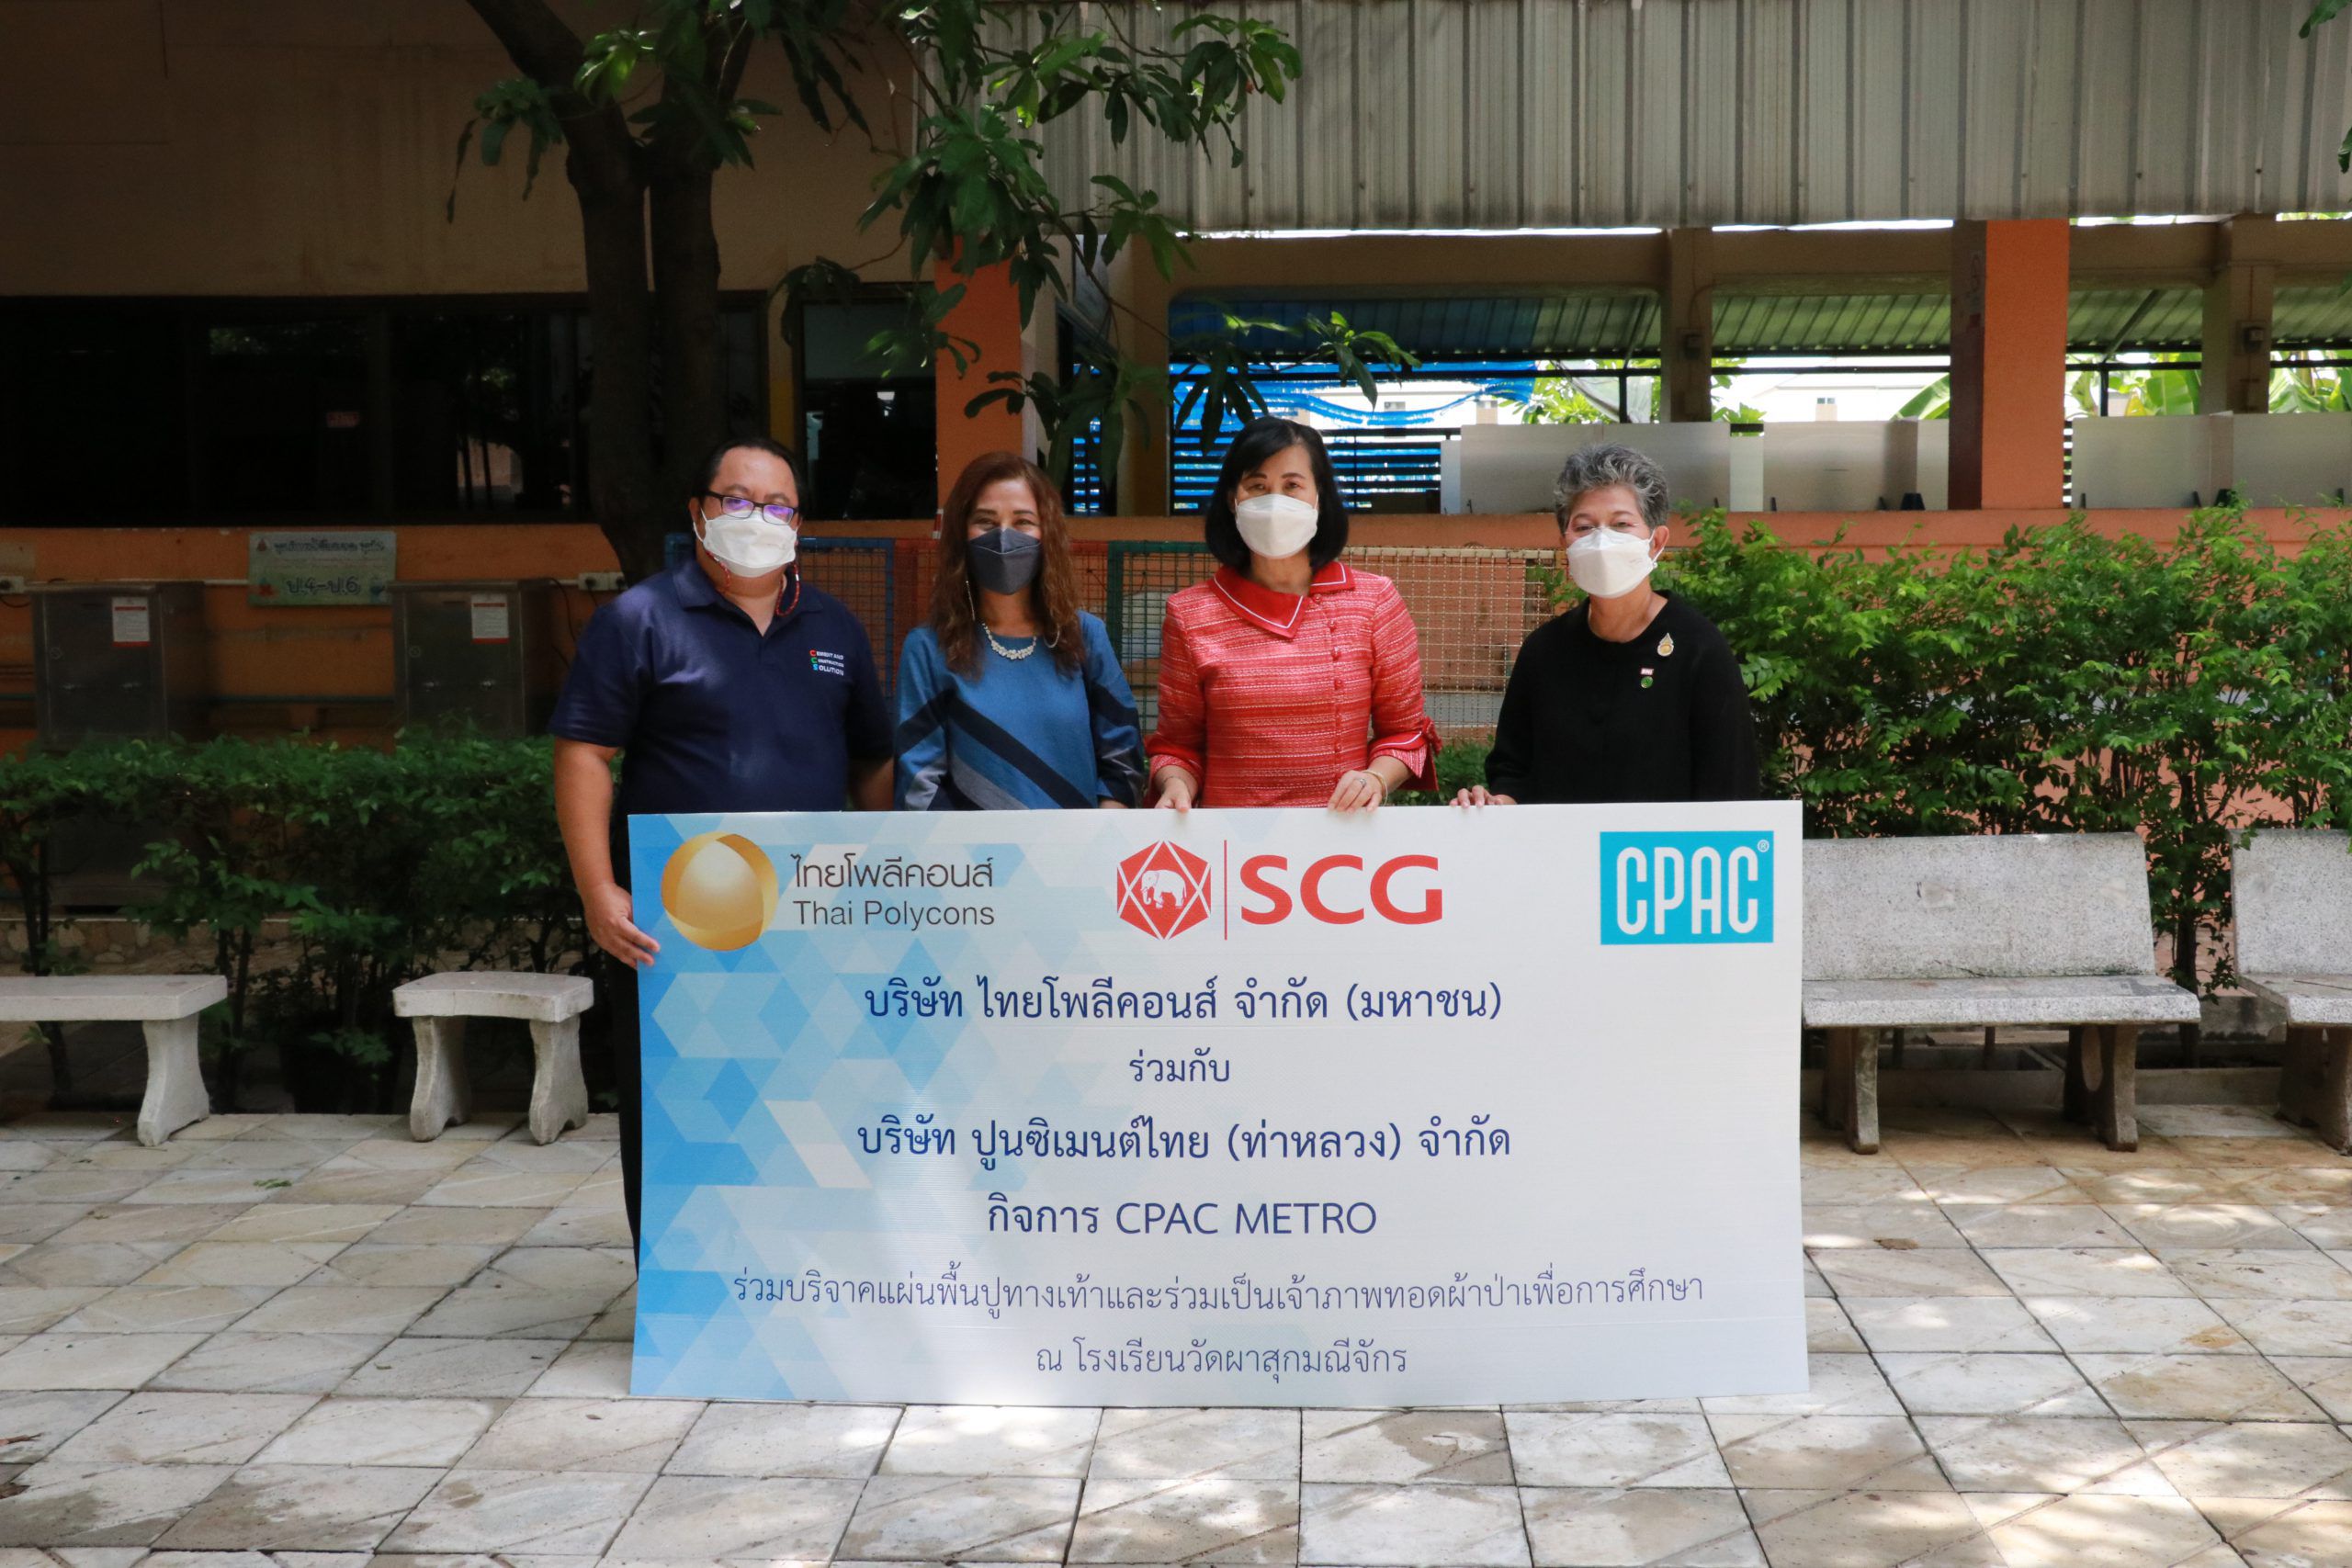 TPOLY and Siam Cement (Tha Luang) donated paving slabs